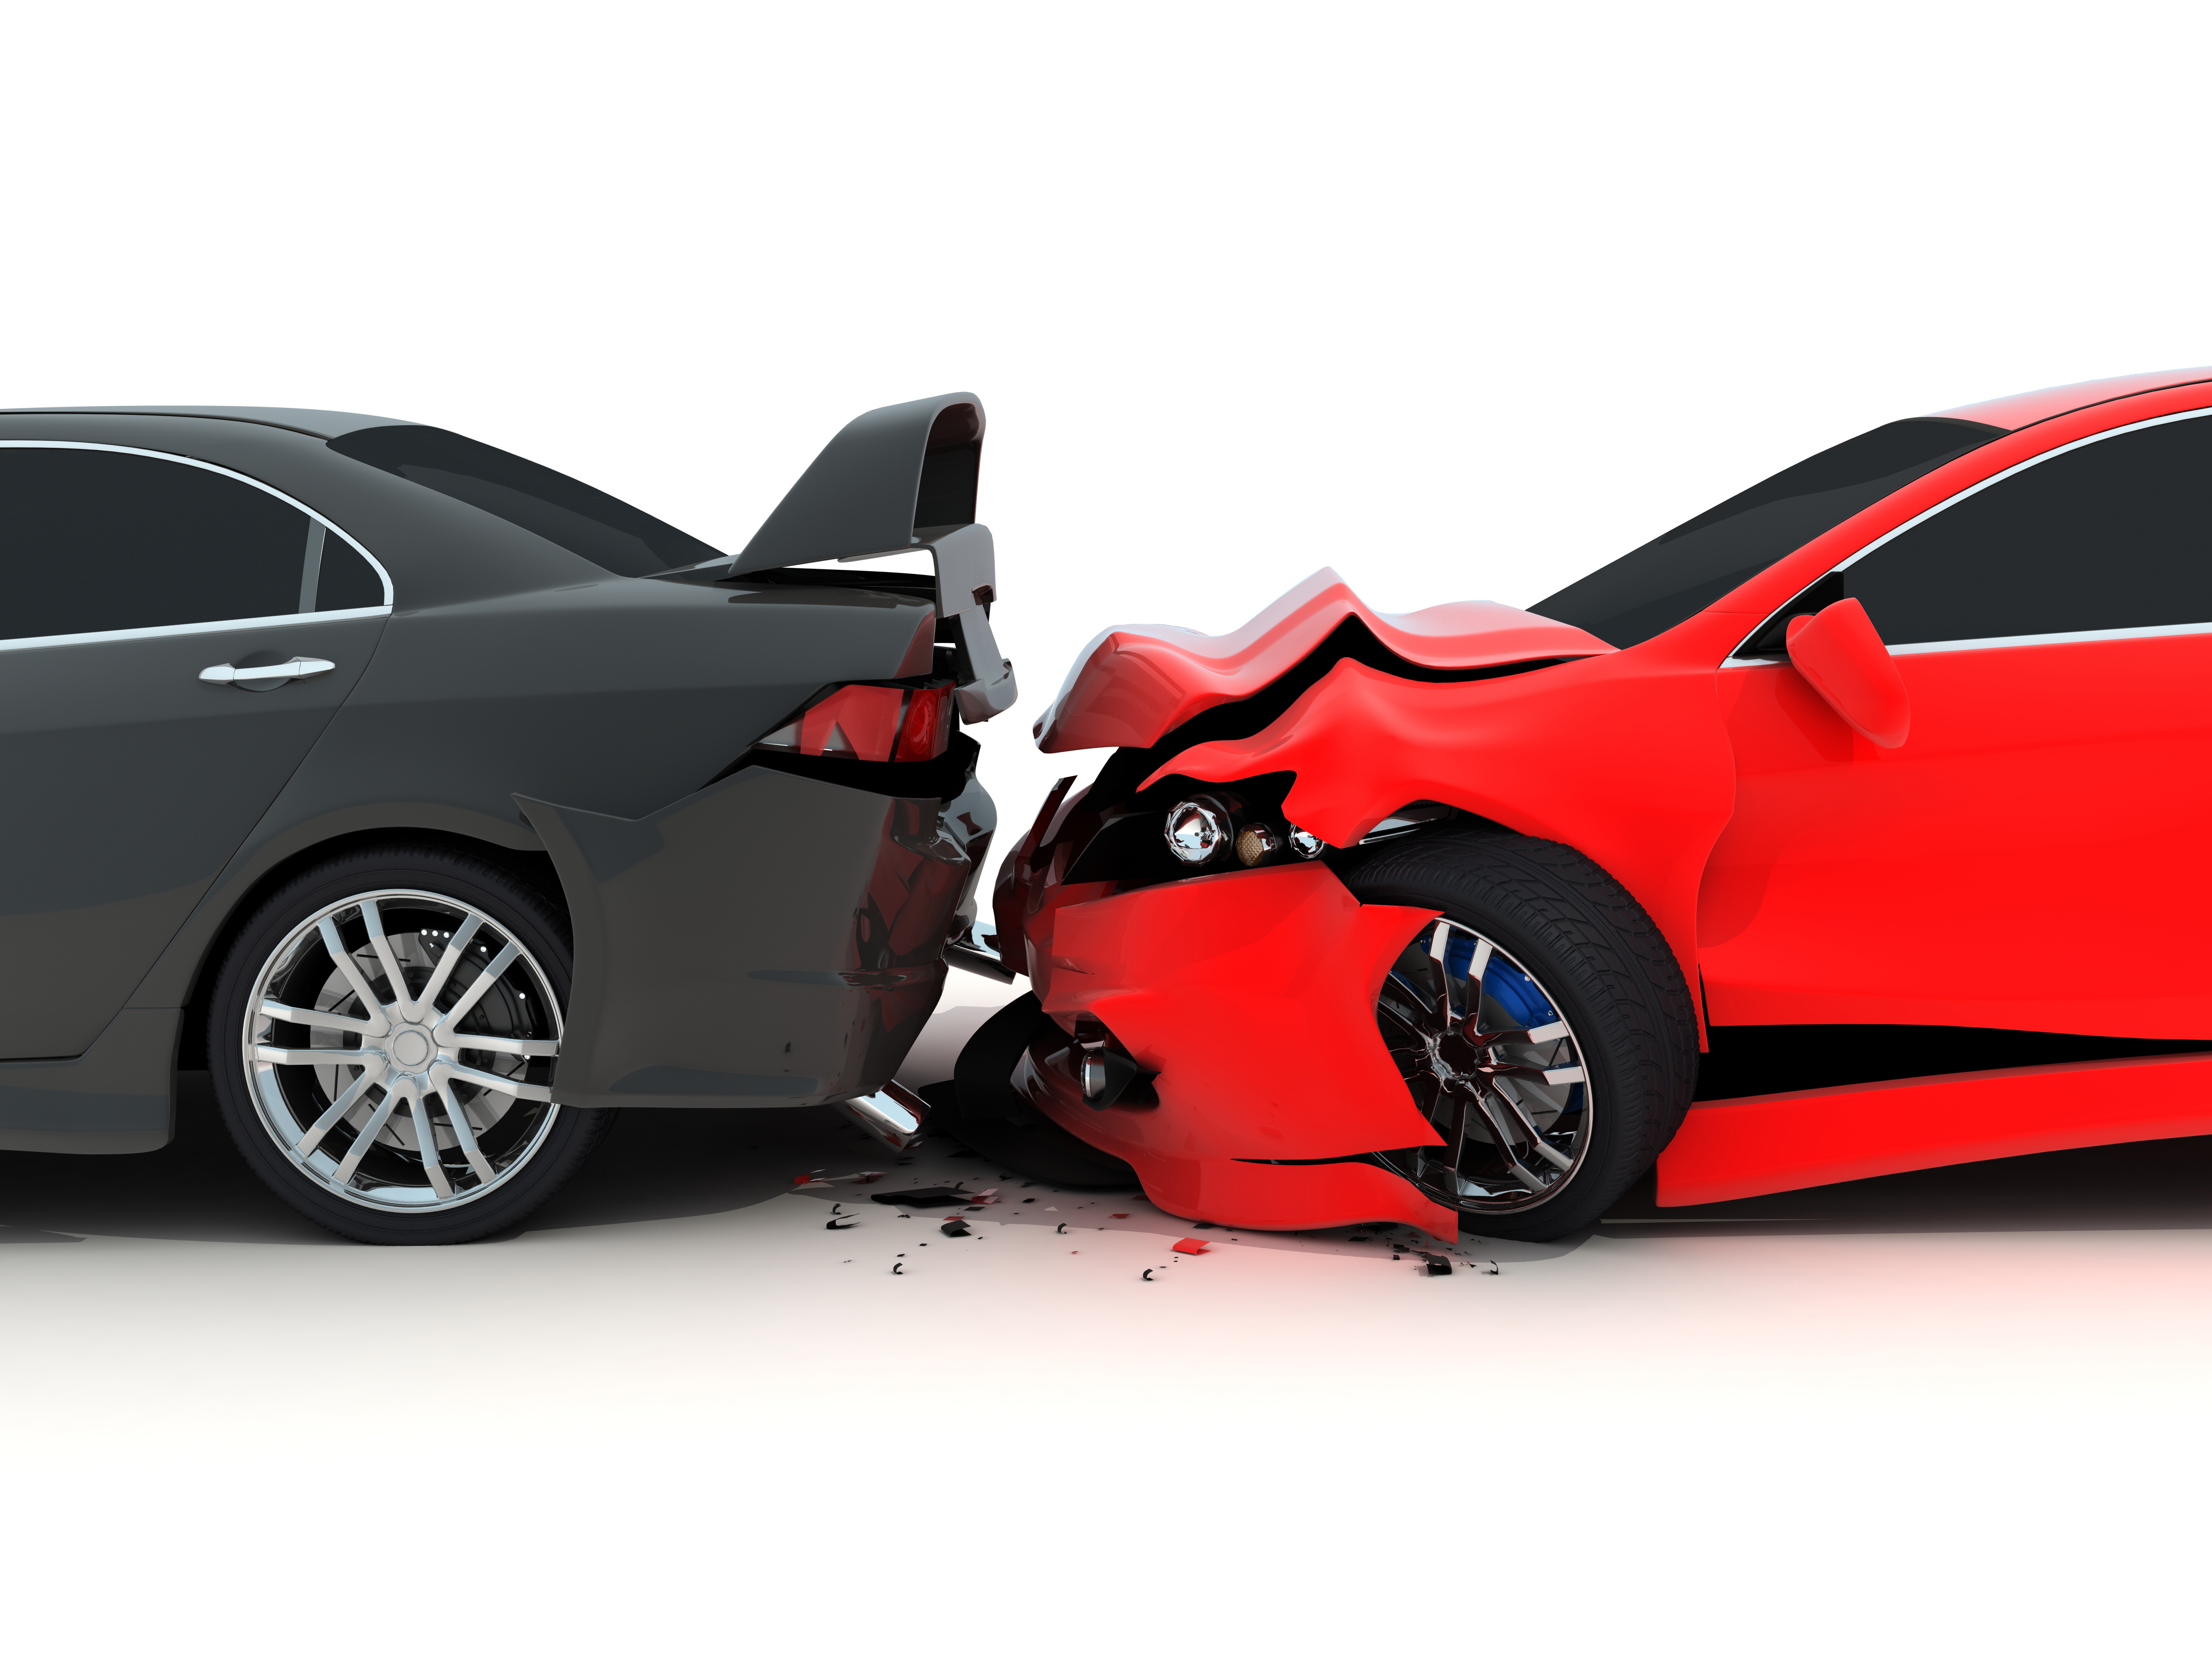 Car crash on white background (done in 3d)